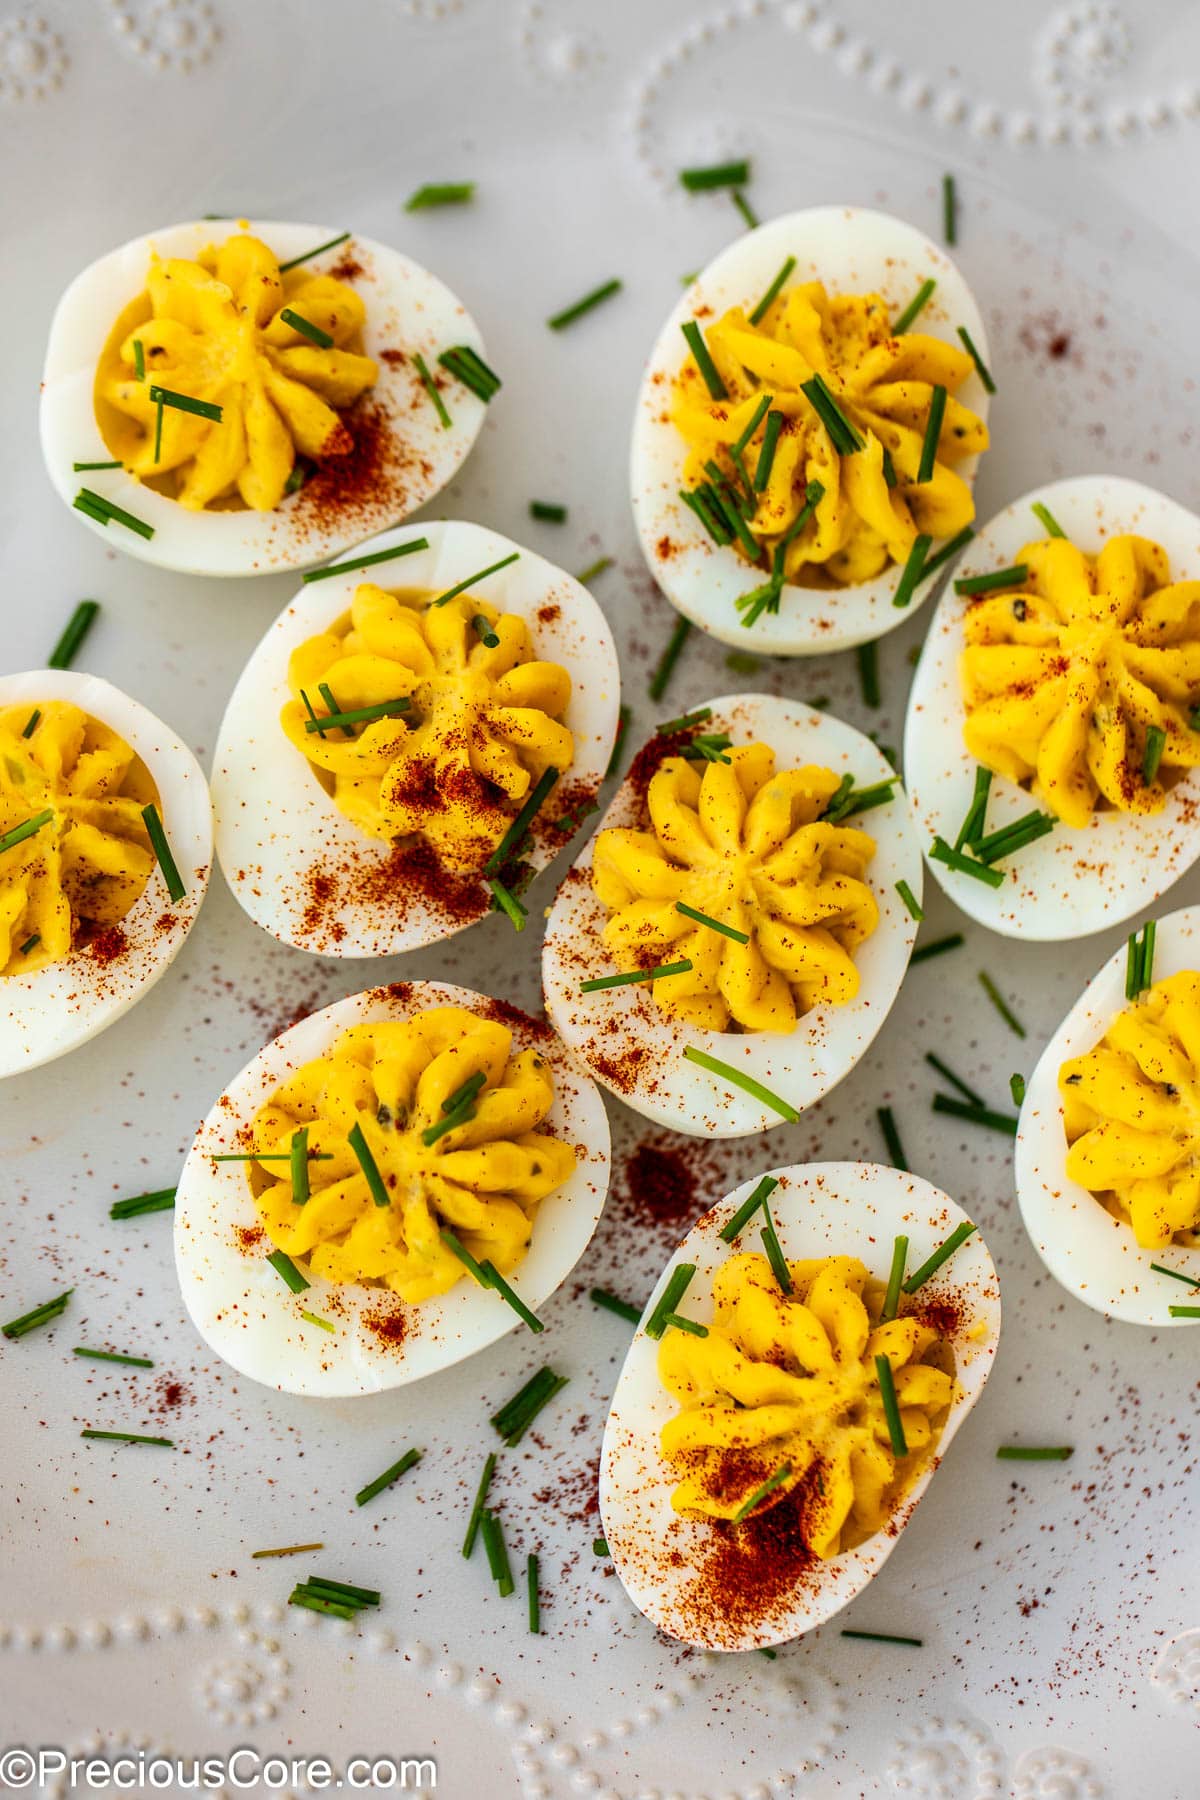 Deviled eggs with paprika and herbs.